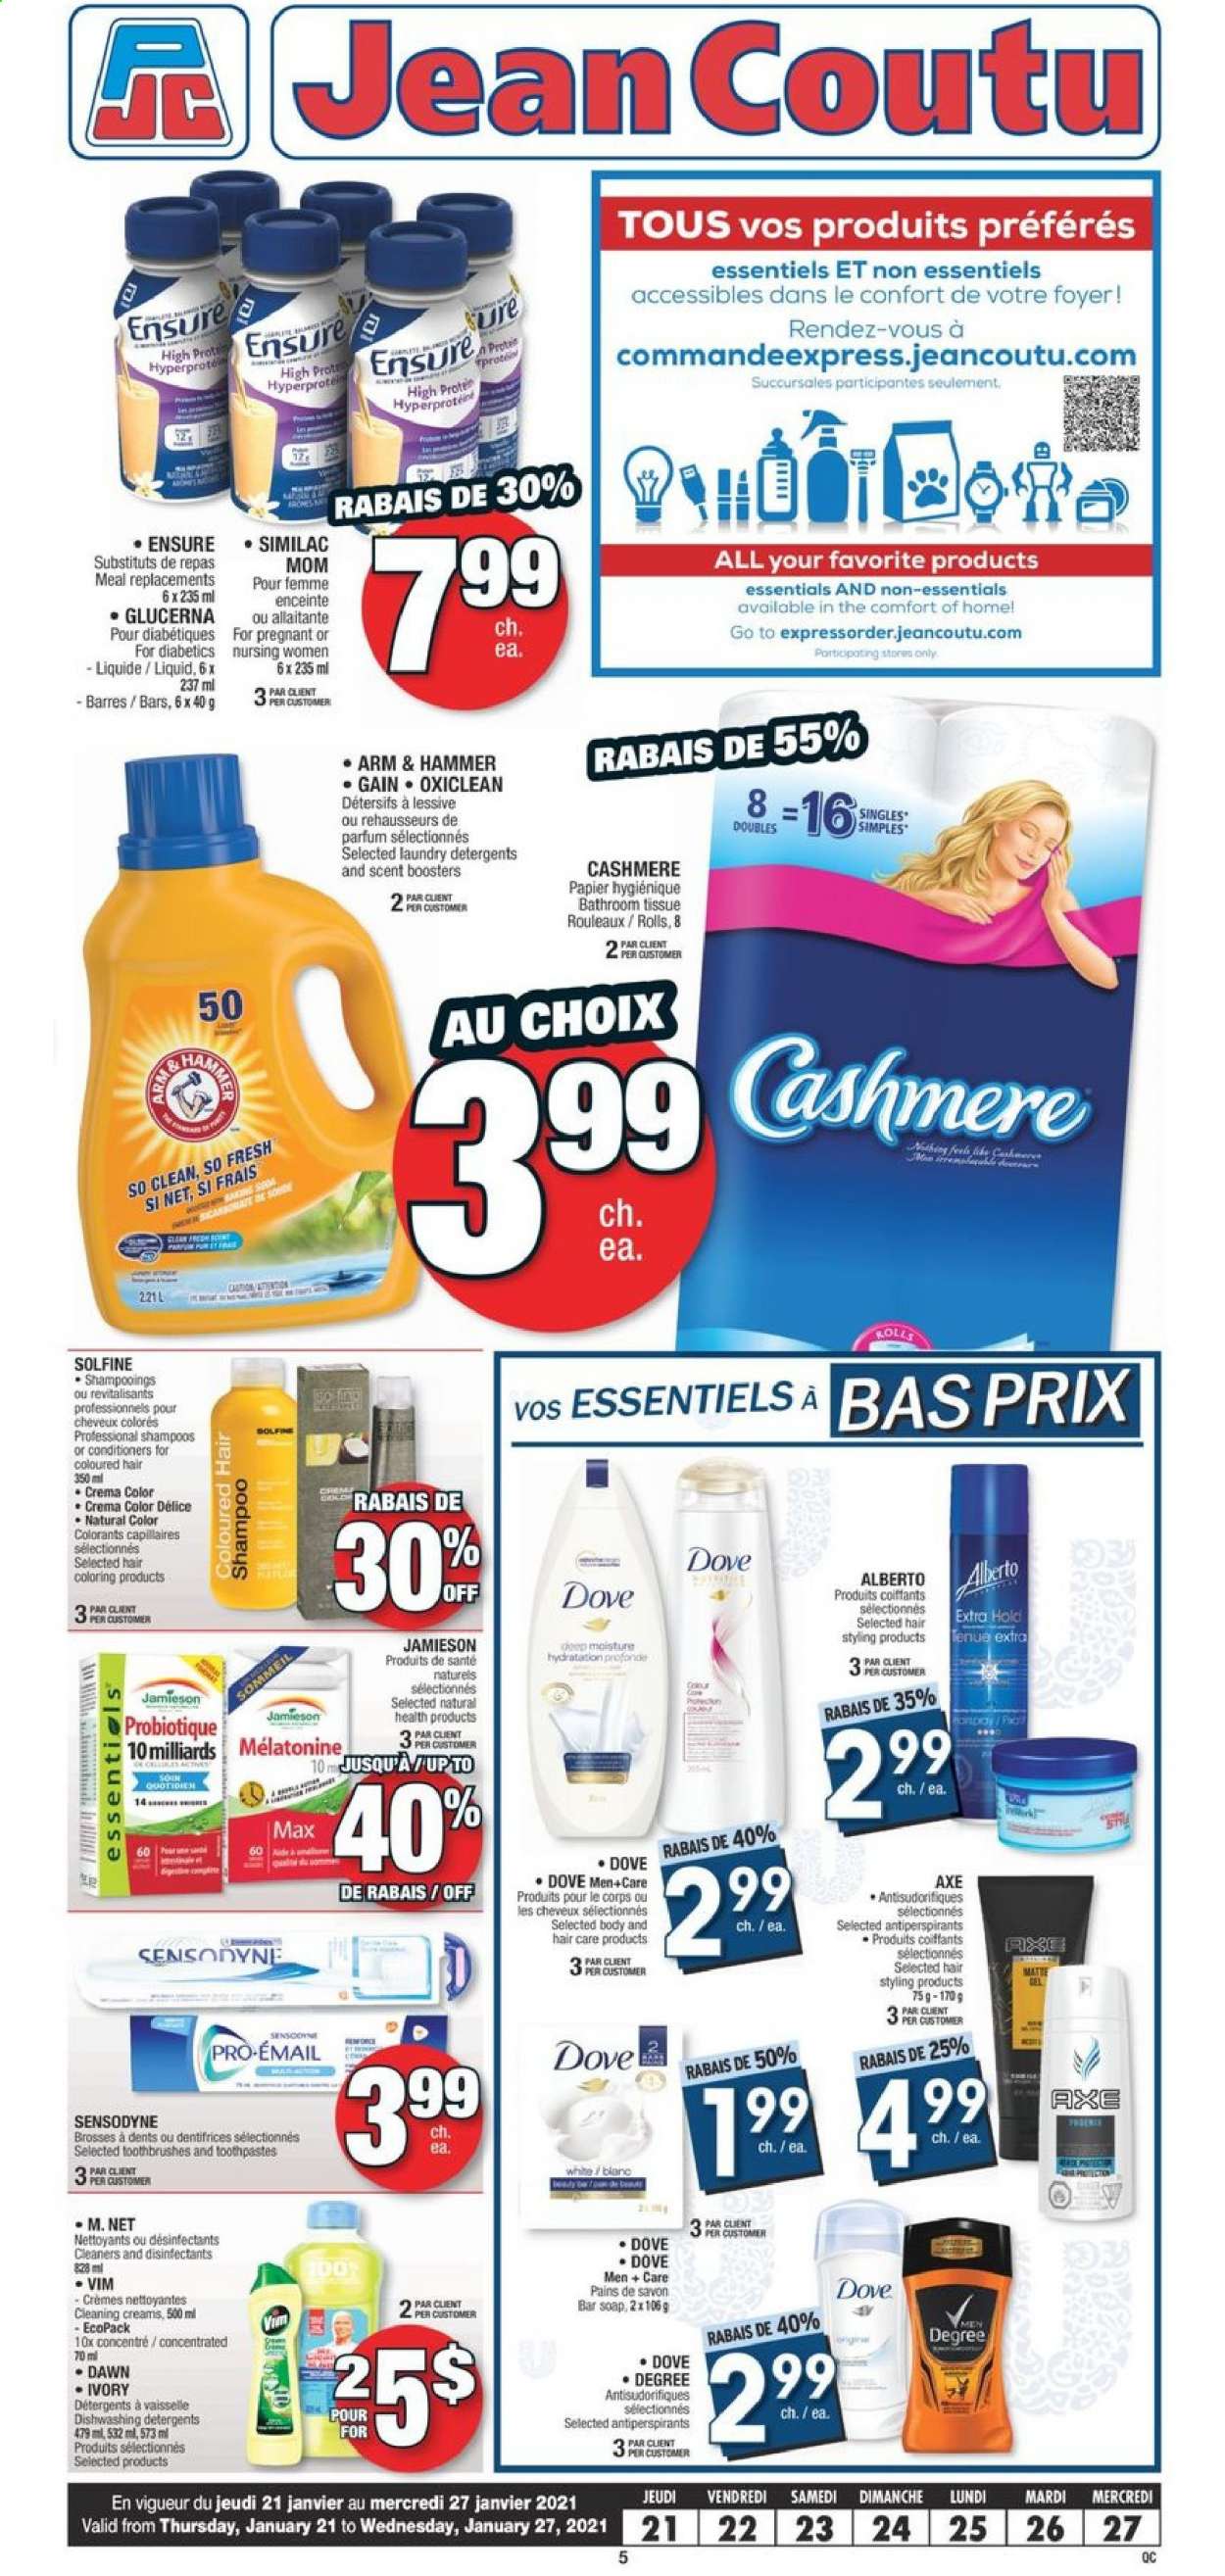 thumbnail - Jean Coutu Flyer - January 21, 2021 - January 27, 2021 - Sales products - ARM & HAMMER, bath tissue, Gain, OxiClean, scent booster, soap bar, soap, Solfine, Glucerna, shampoo, Sensodyne. Page 1.